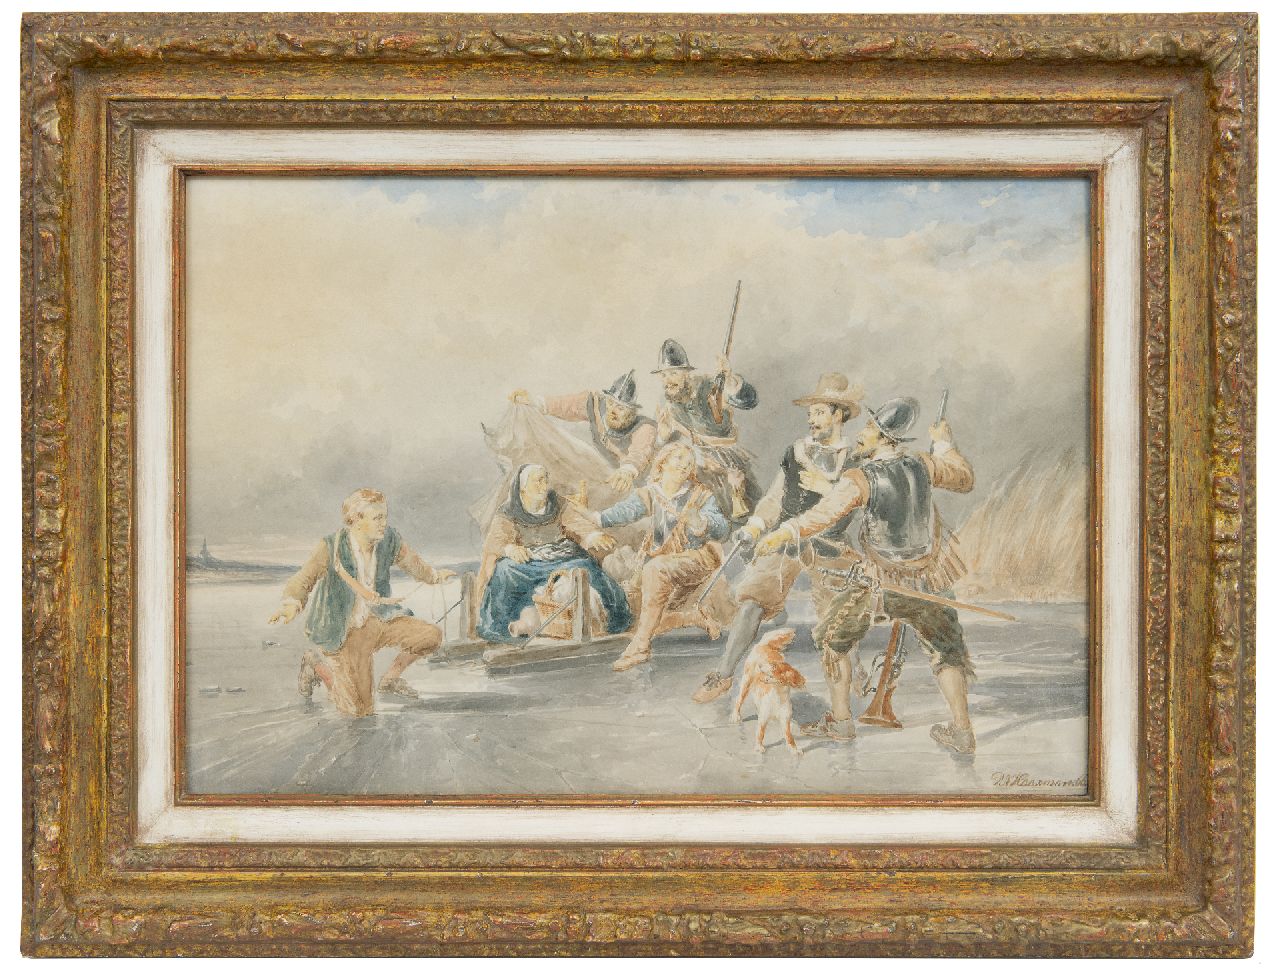 Haaxman P.A.  | Pieter Alardus Haaxman, The escape of Lambert Melisz mother during the Eighty Years' War, watercolour on paper 33.7 x 50.8 cm, signed l.r. and dated '66